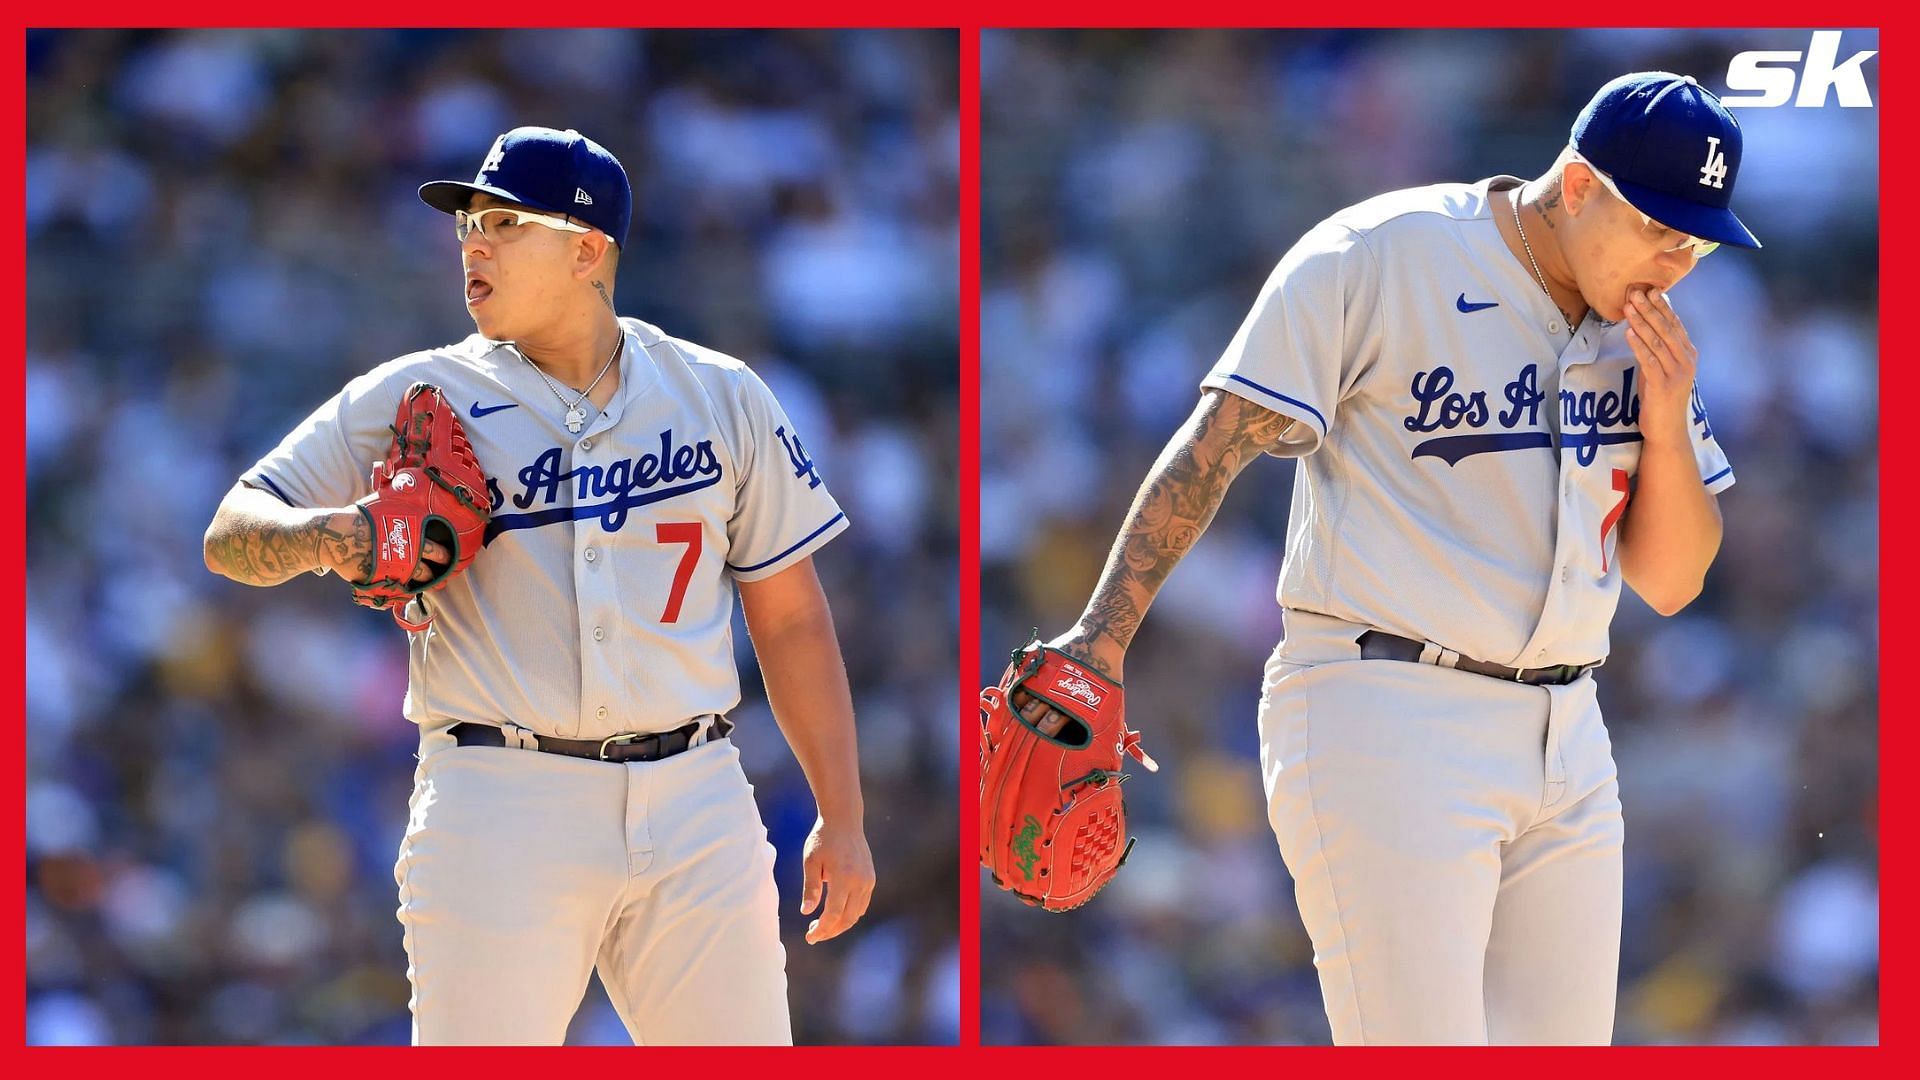 Los Angeles Dodgers fans frustrated as Julio Urias gives up five runs in first inning against Kansas City Royals